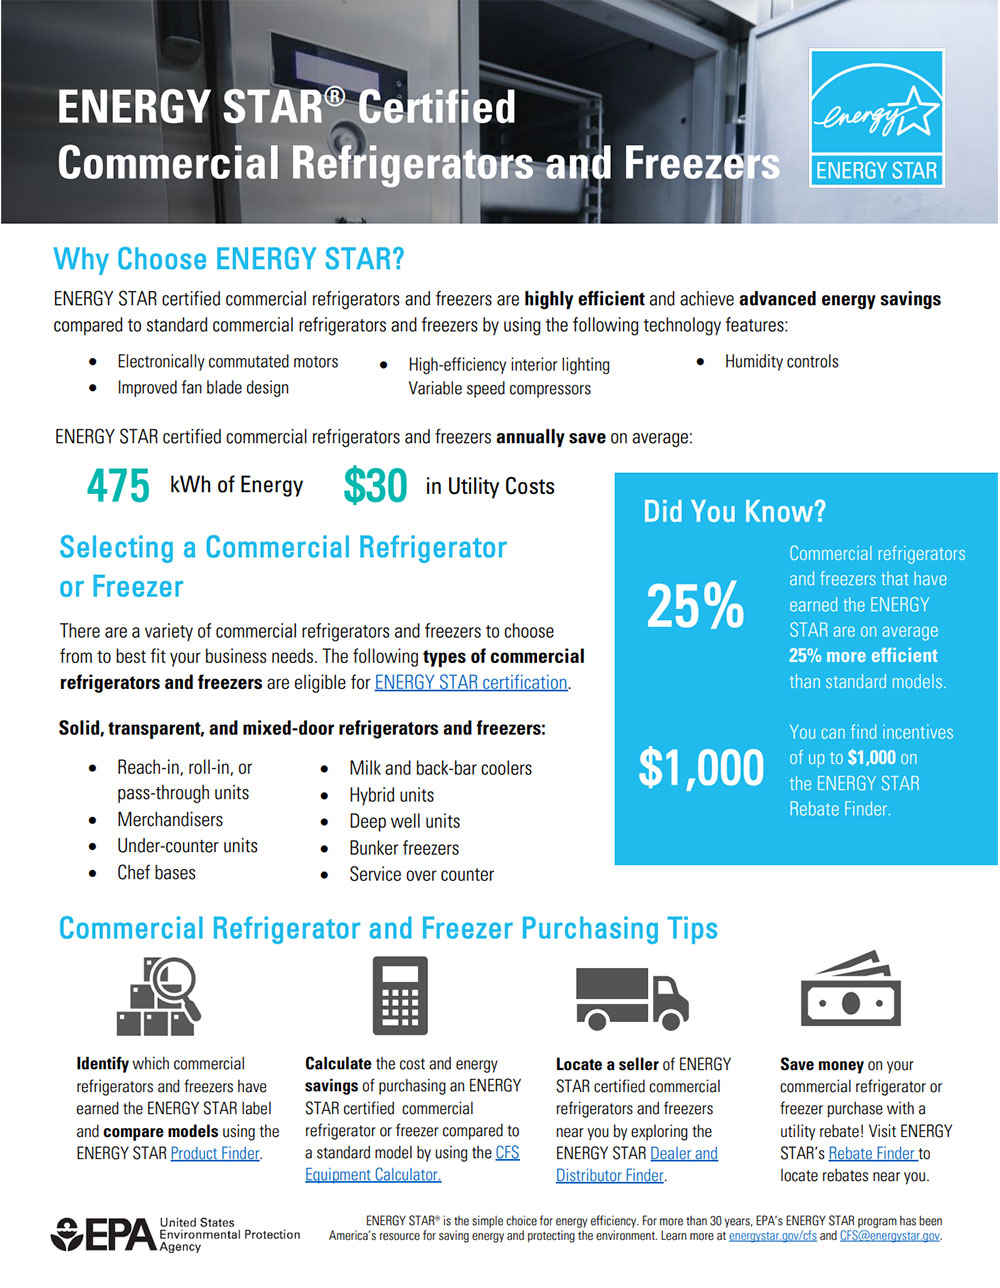 ENERGY STAR® Certified Commercial Refrigerators and Freezers